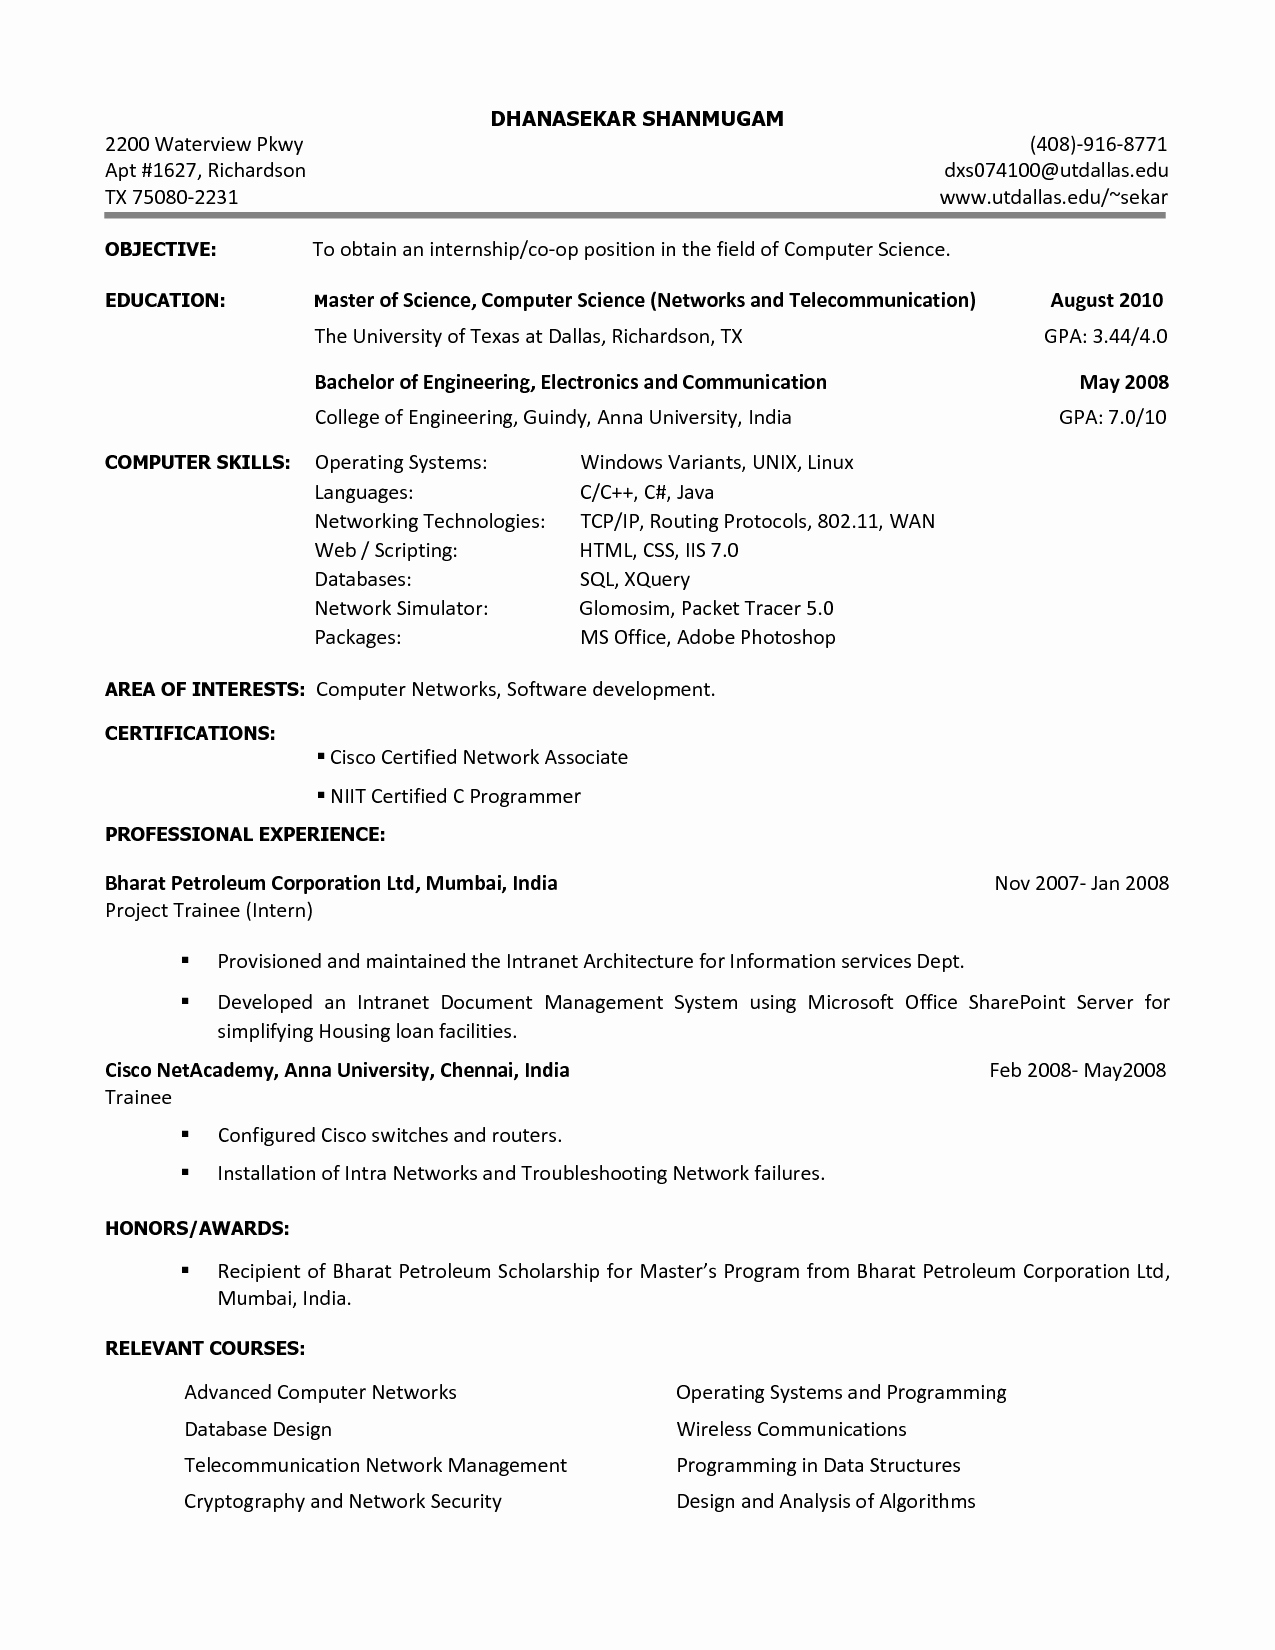 Performing Arts Resume Template Awesome Food Science Internship Cover Letter Cccepa News Spring